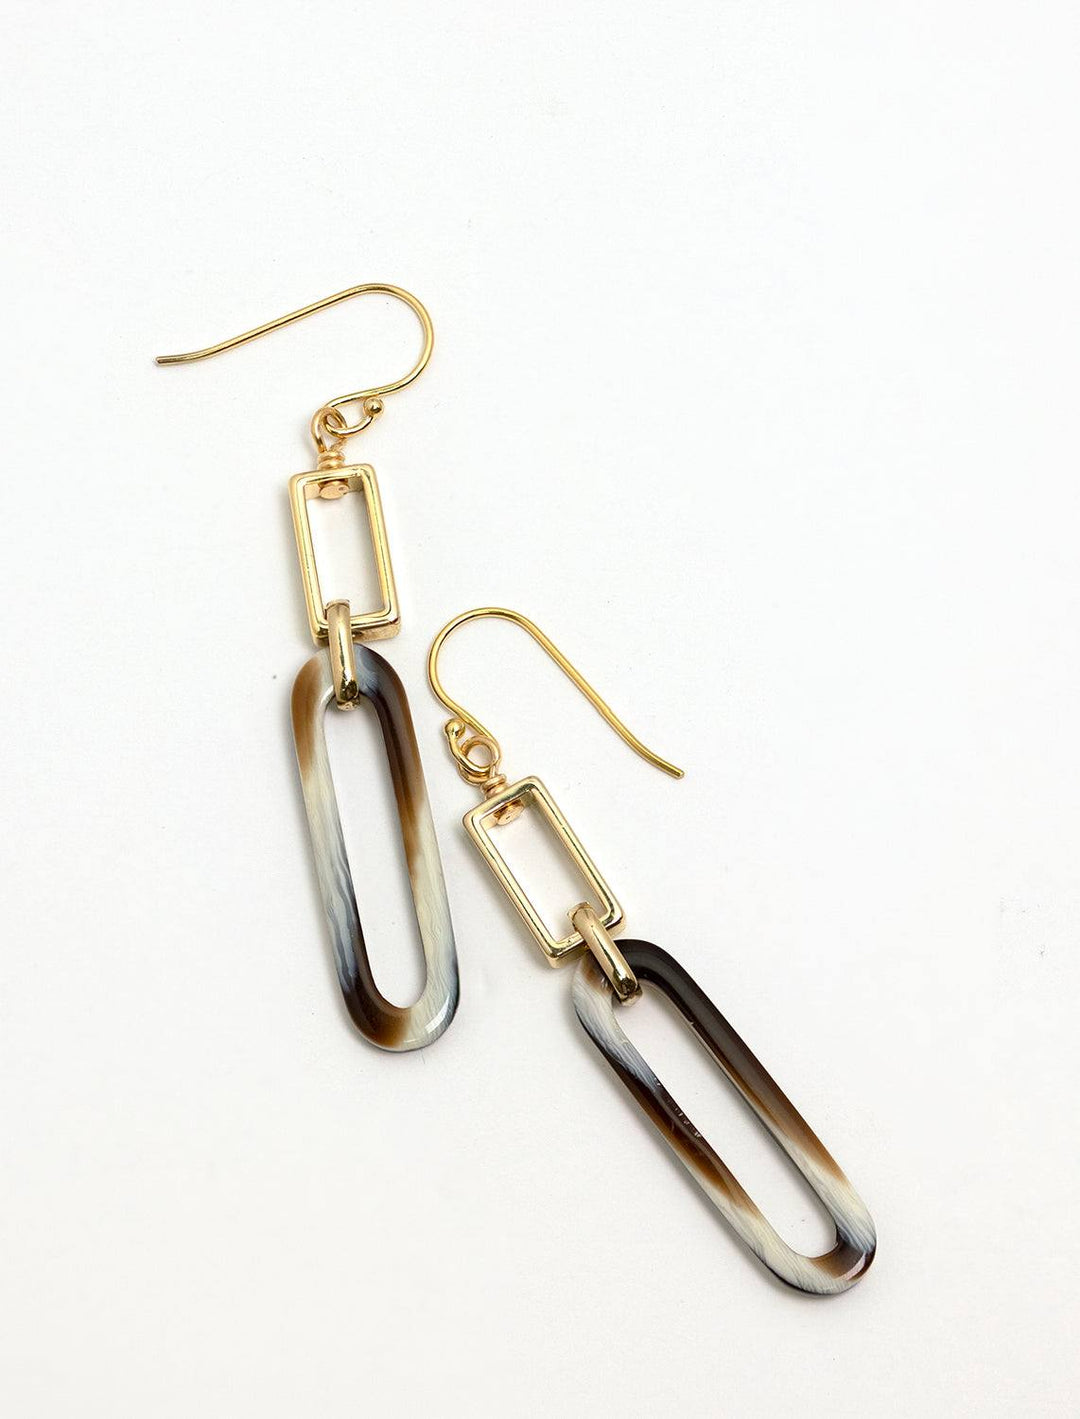 a closer view of the lucite earrings showing different color tones found in the lucite paperclip link